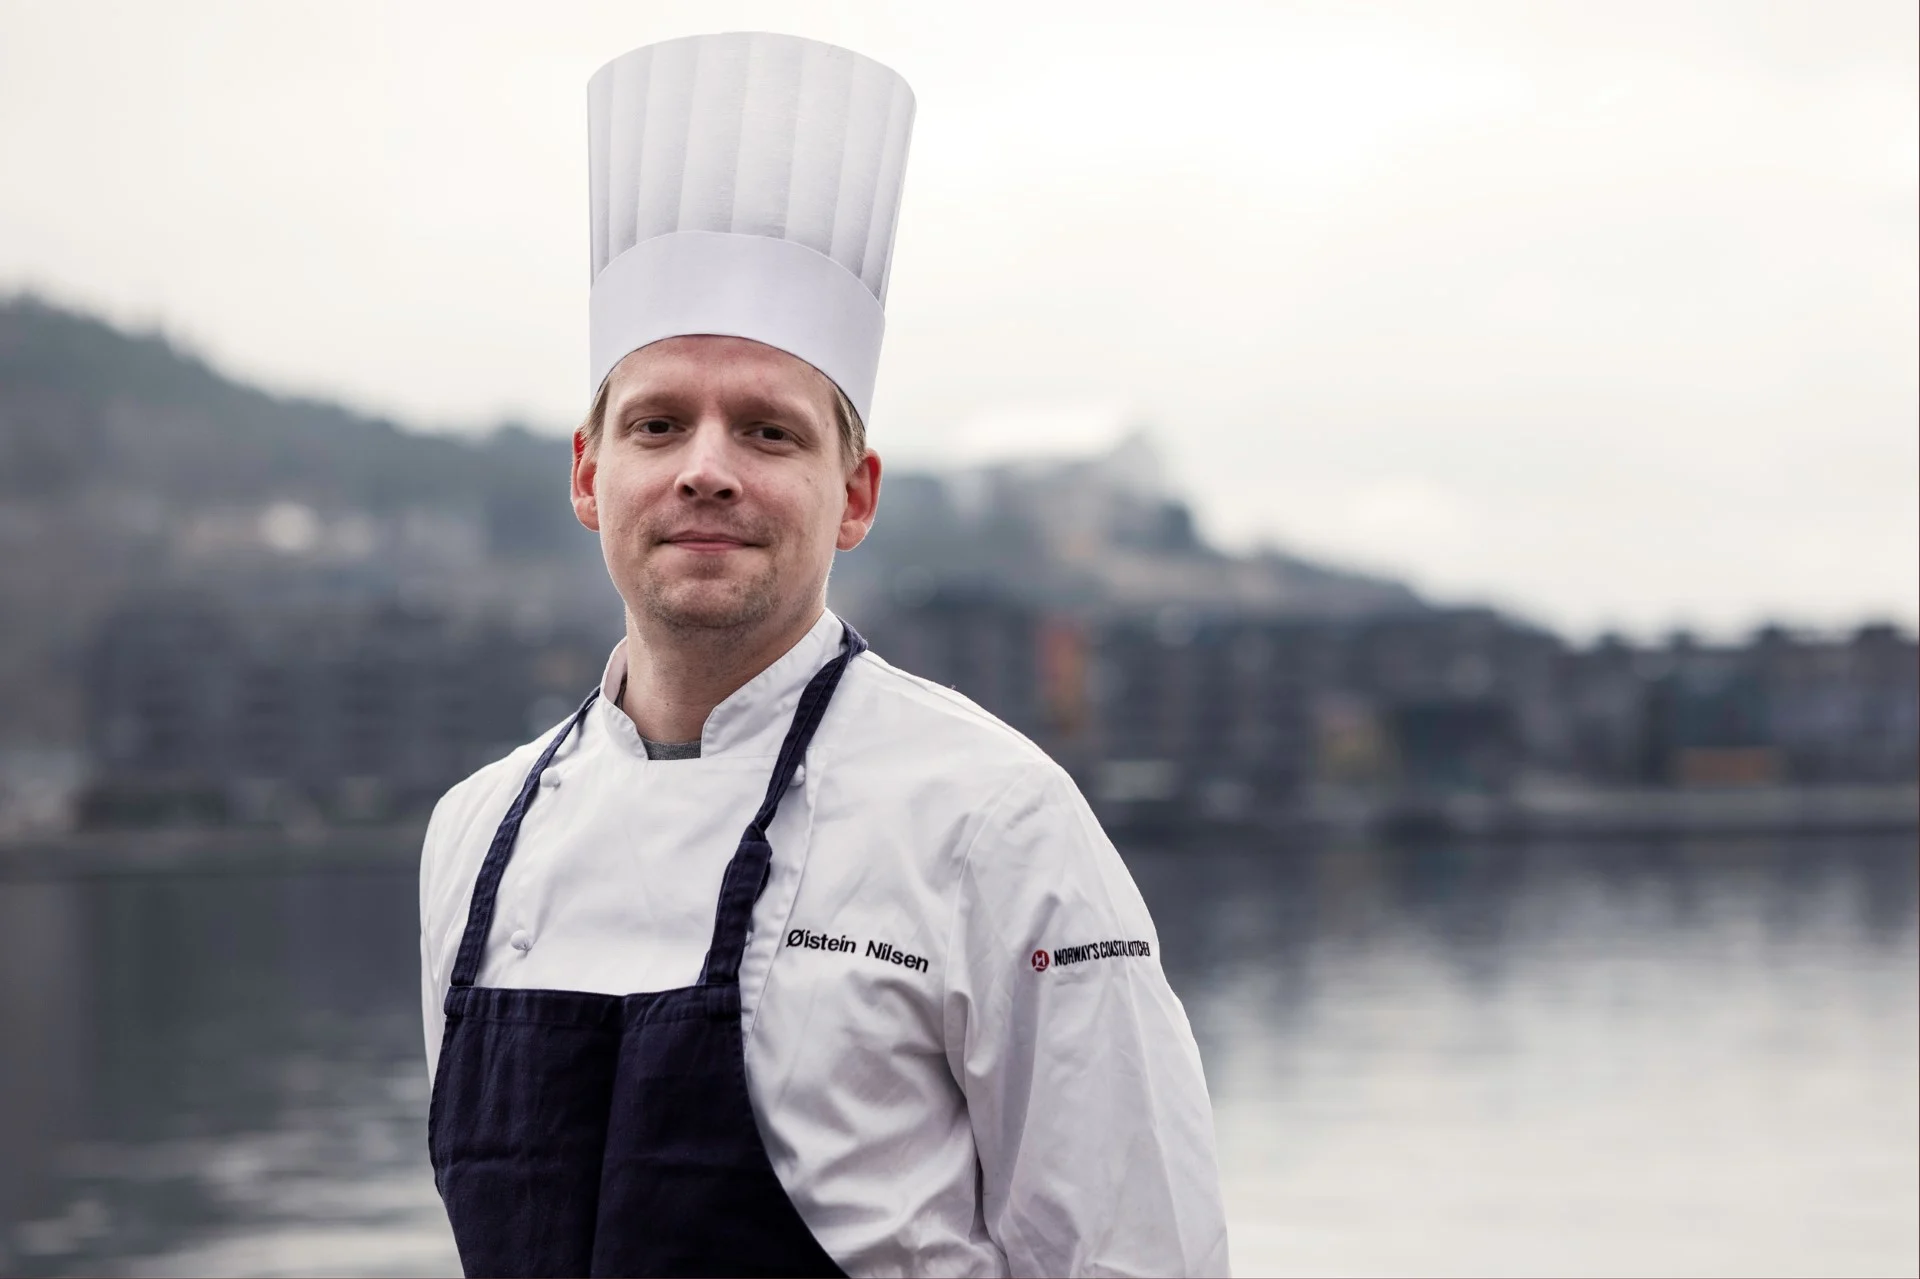 Head chef Øystein Nilsen is standing outside in his chefs clothing